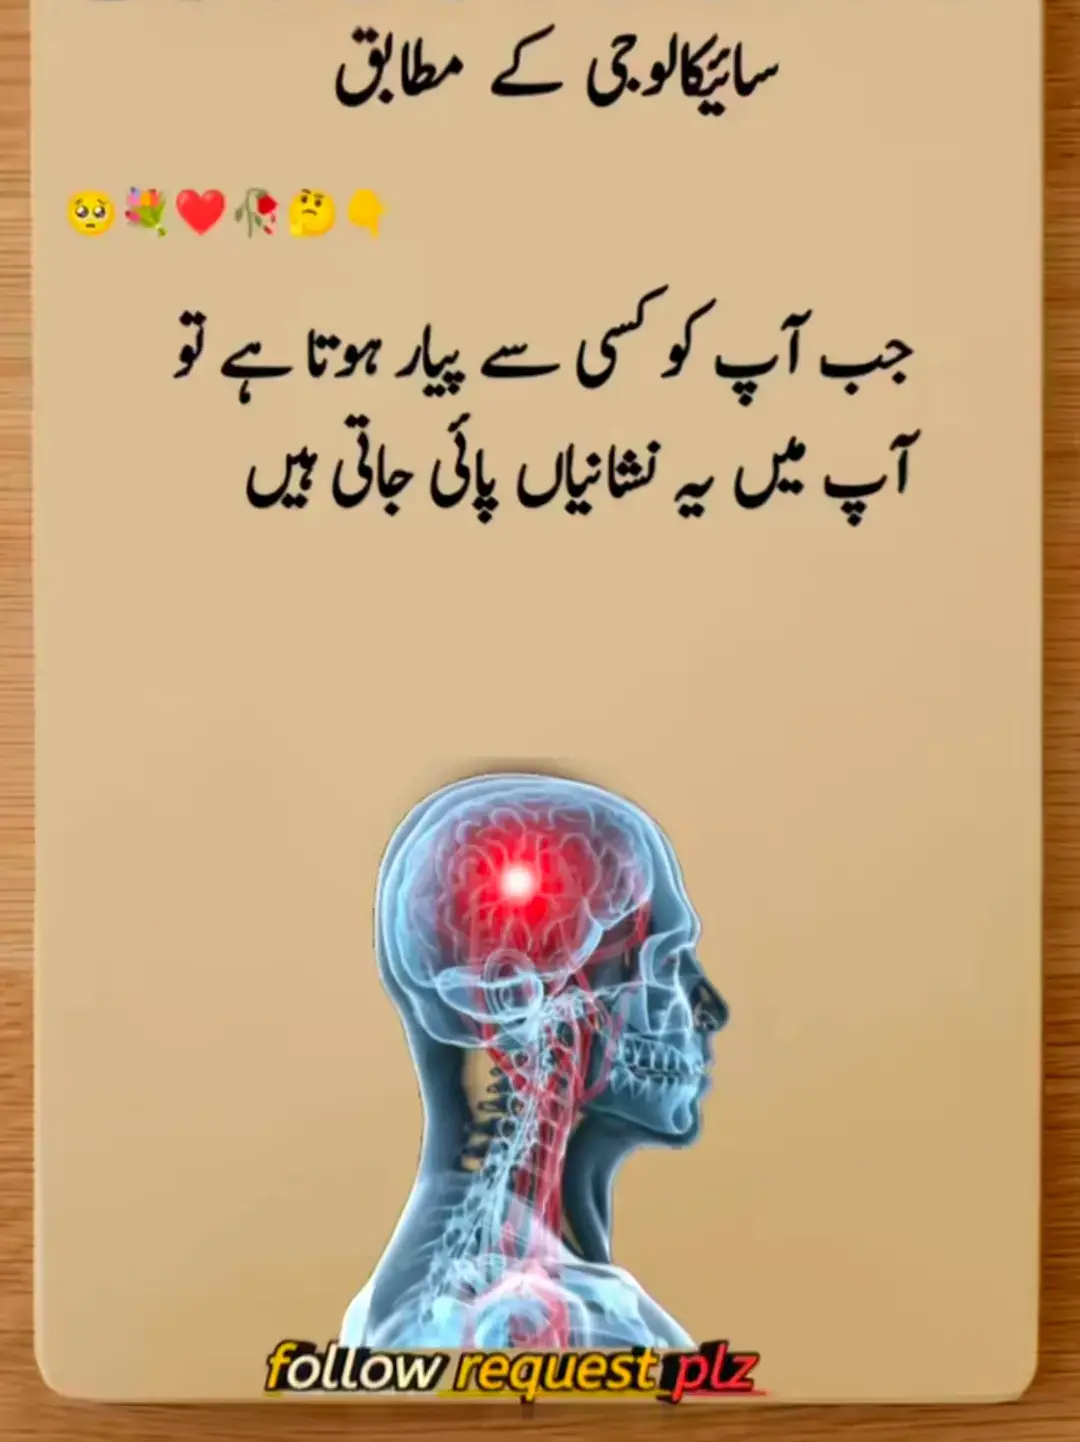 #foryou #foryoupage #fyp #mohabbat #Love #brain #viewsproblem💔😔 #fypシ゚viralvideo🤗foryou👈foryou #fillings #heart #growthmyaccount #deartiktokteamdontremovemyvideo #ahsanwrites 